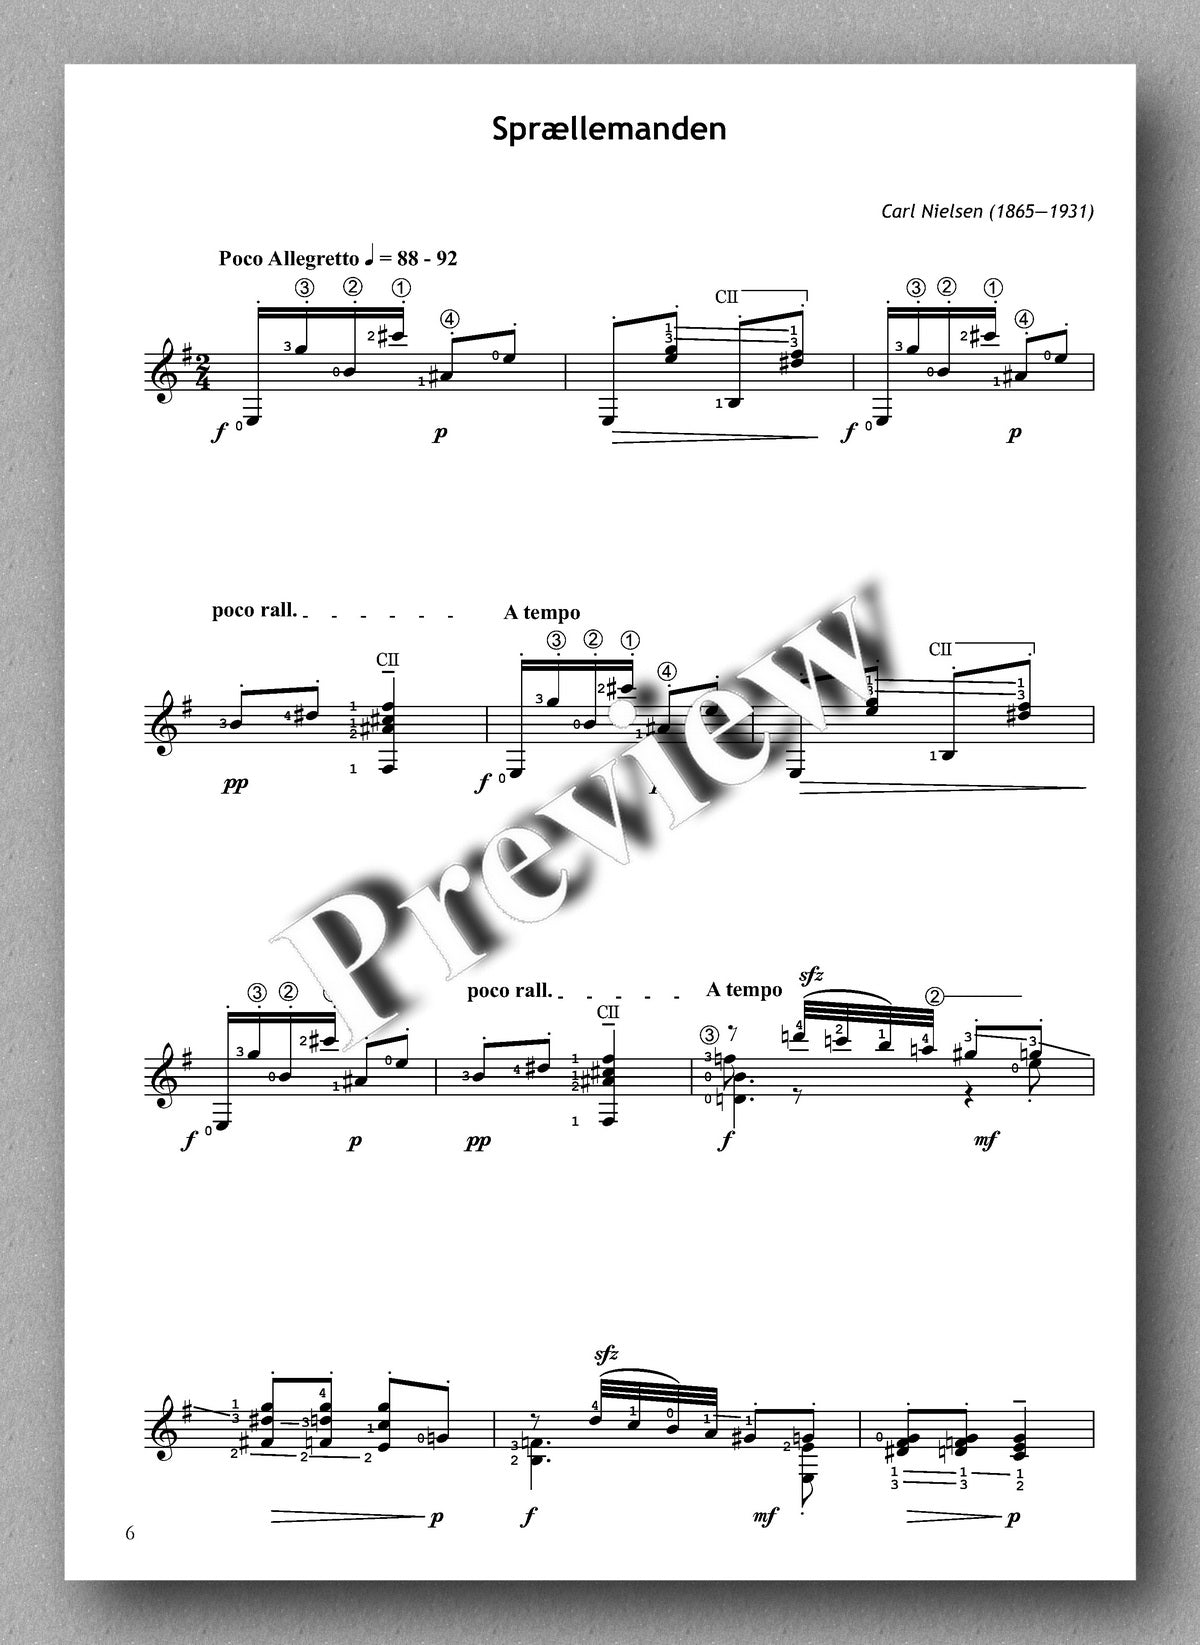 Carl Nielsen (1865-1931), Three pieces from Humoreske Bagateller, Opus 11 - preview of the music score 3